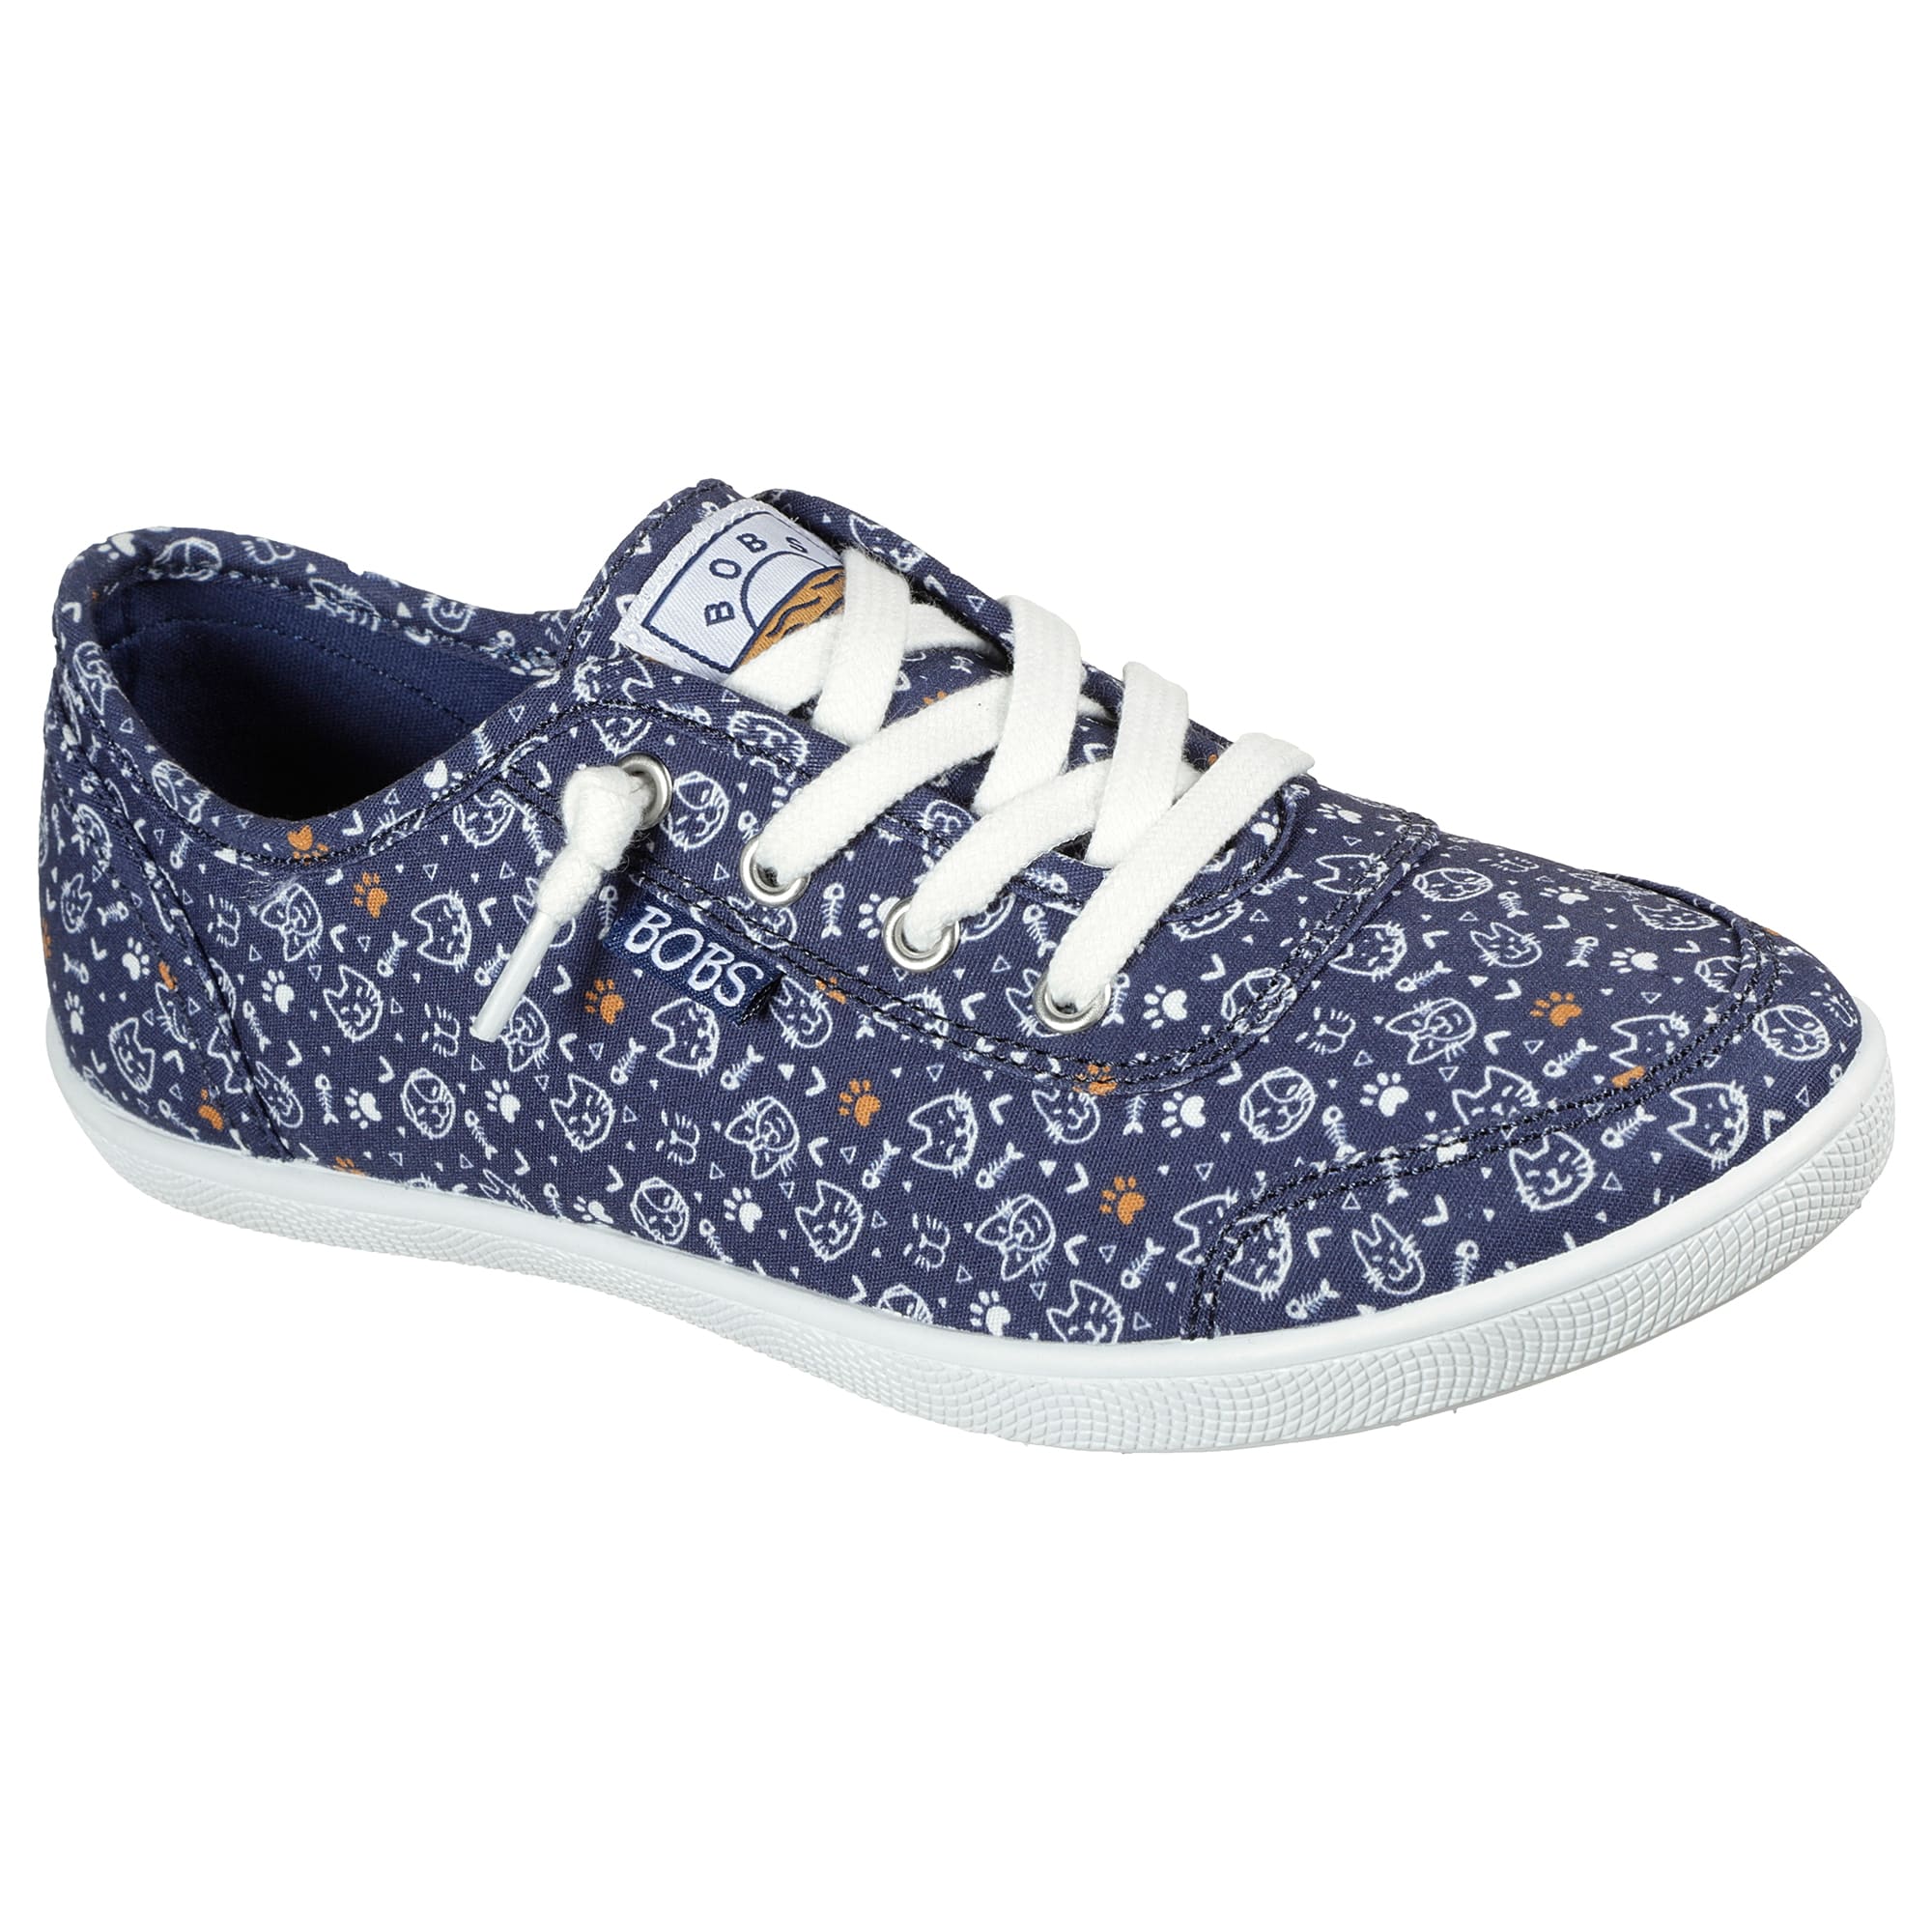 BOBS Shoes Sneakers Shoe Carnival | vlr.eng.br